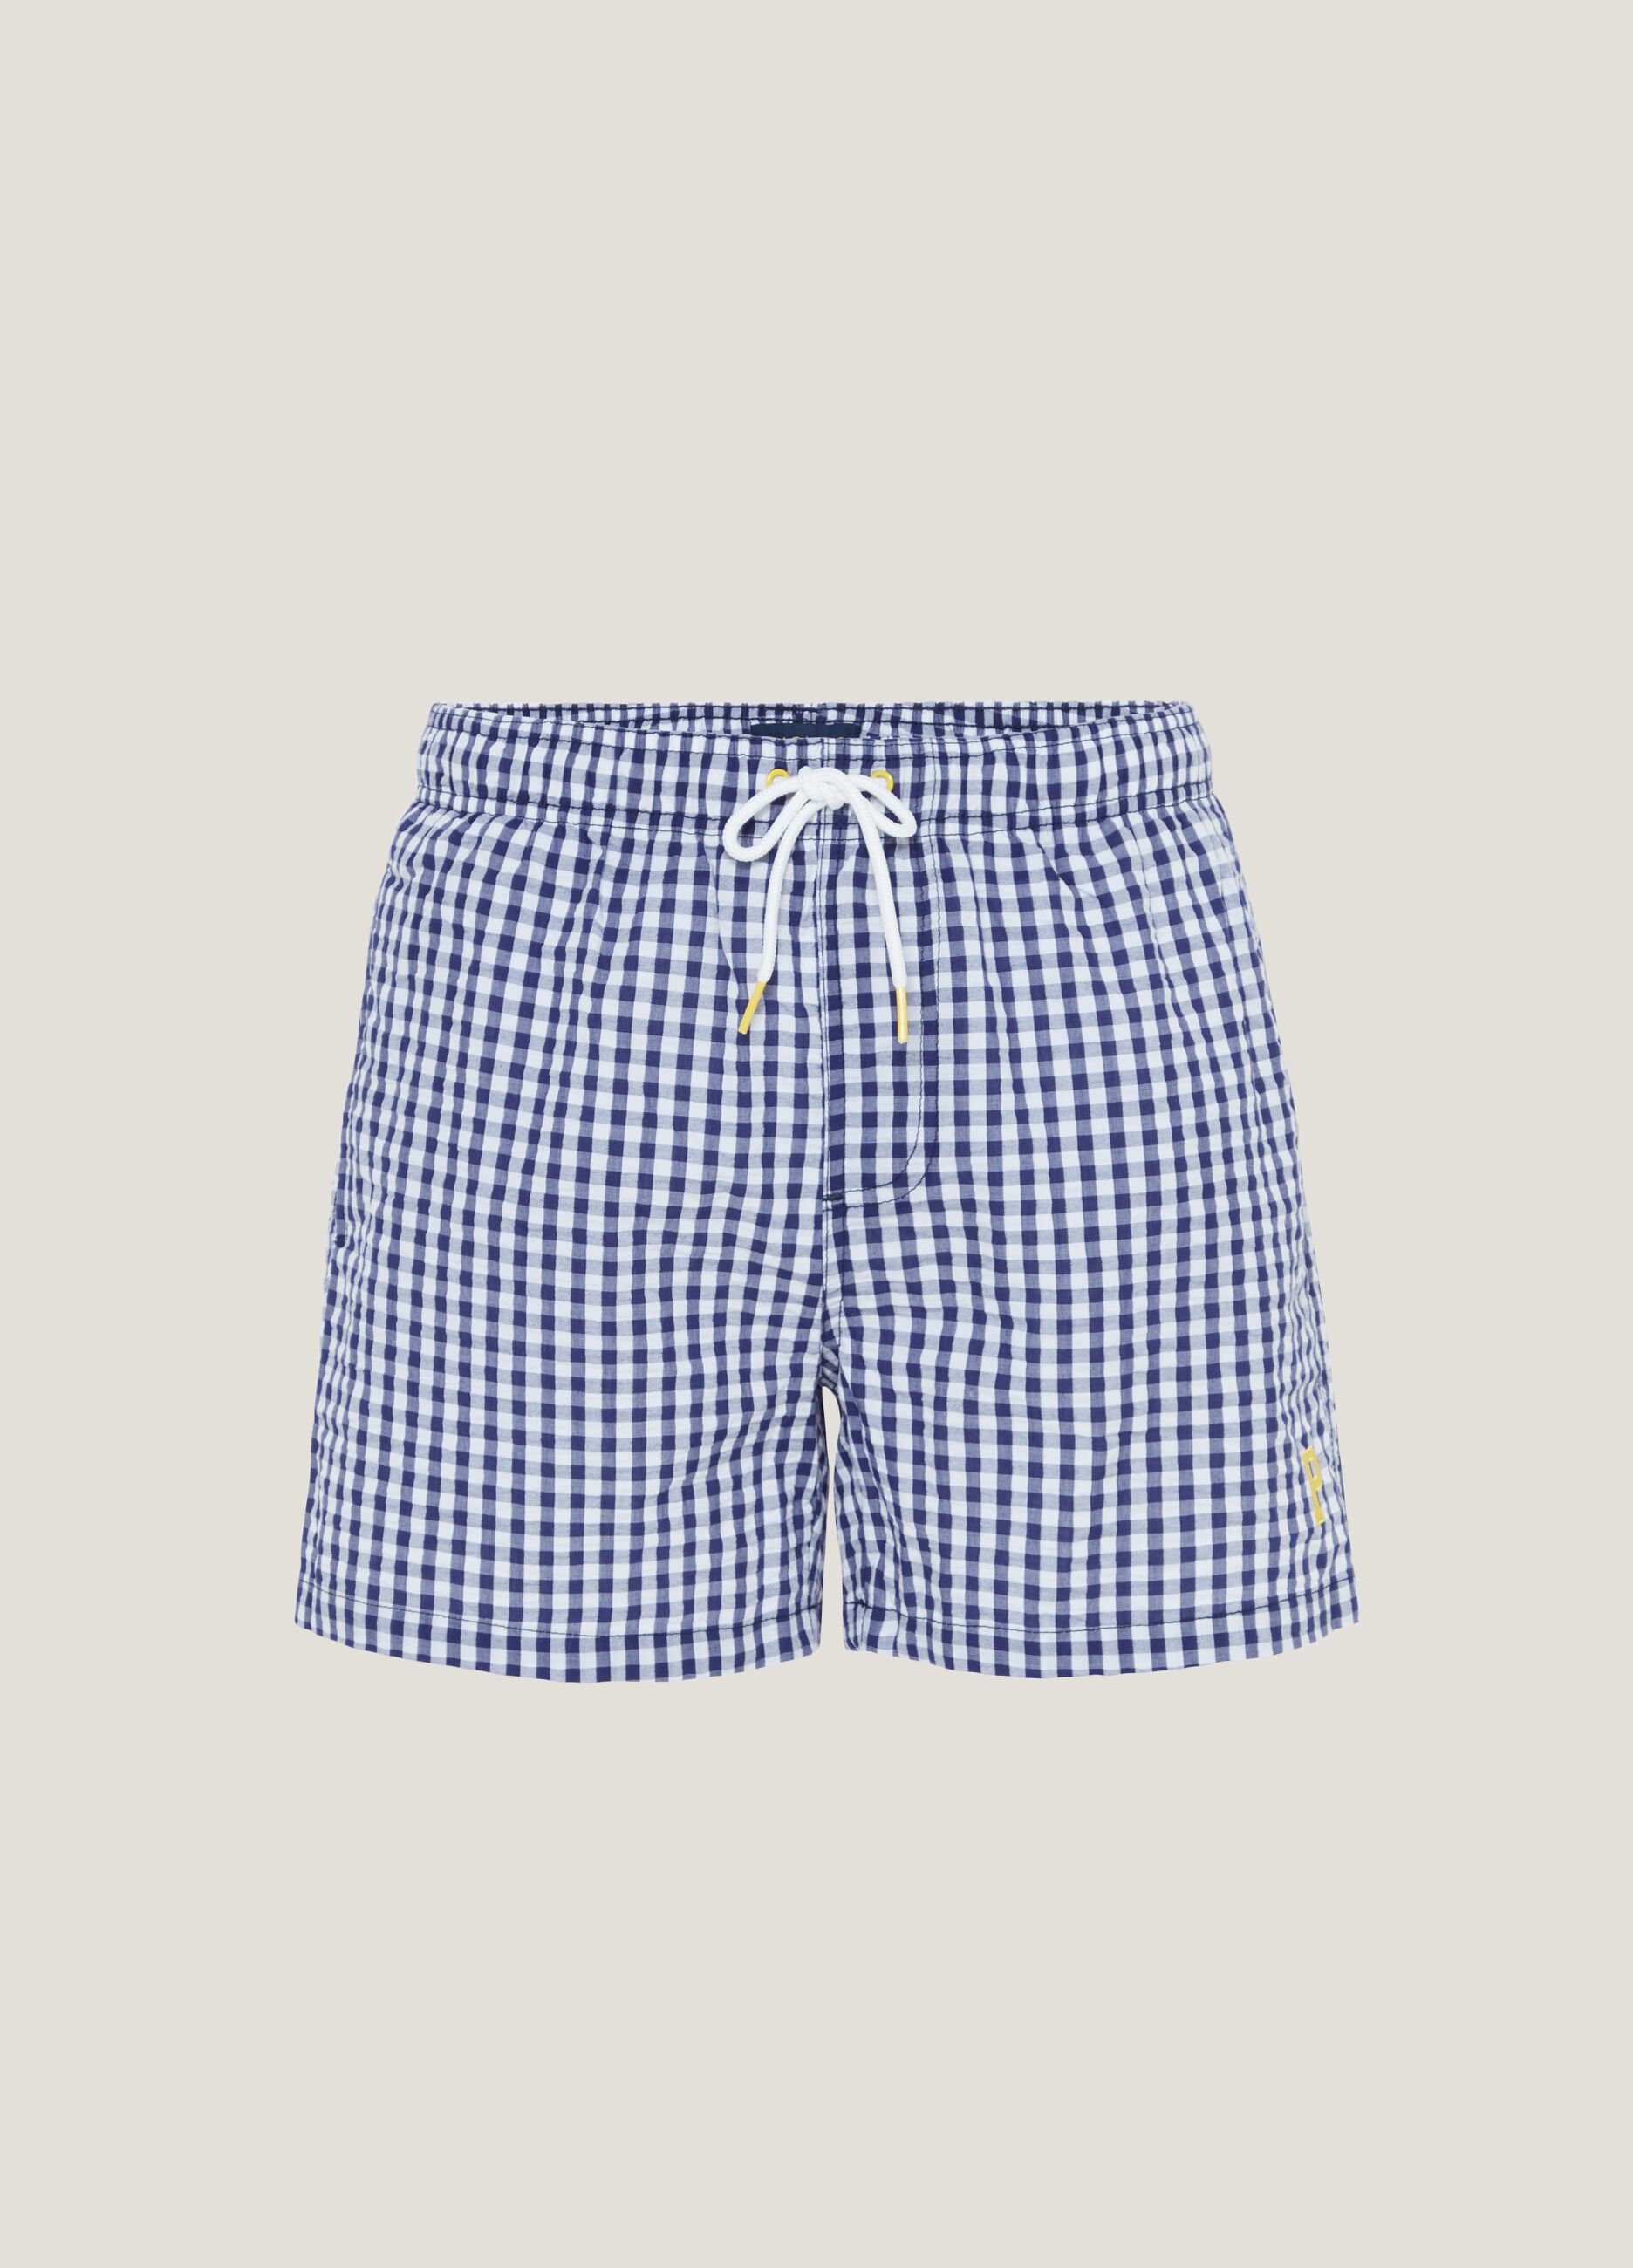 Swimming trunks in gingham cotton